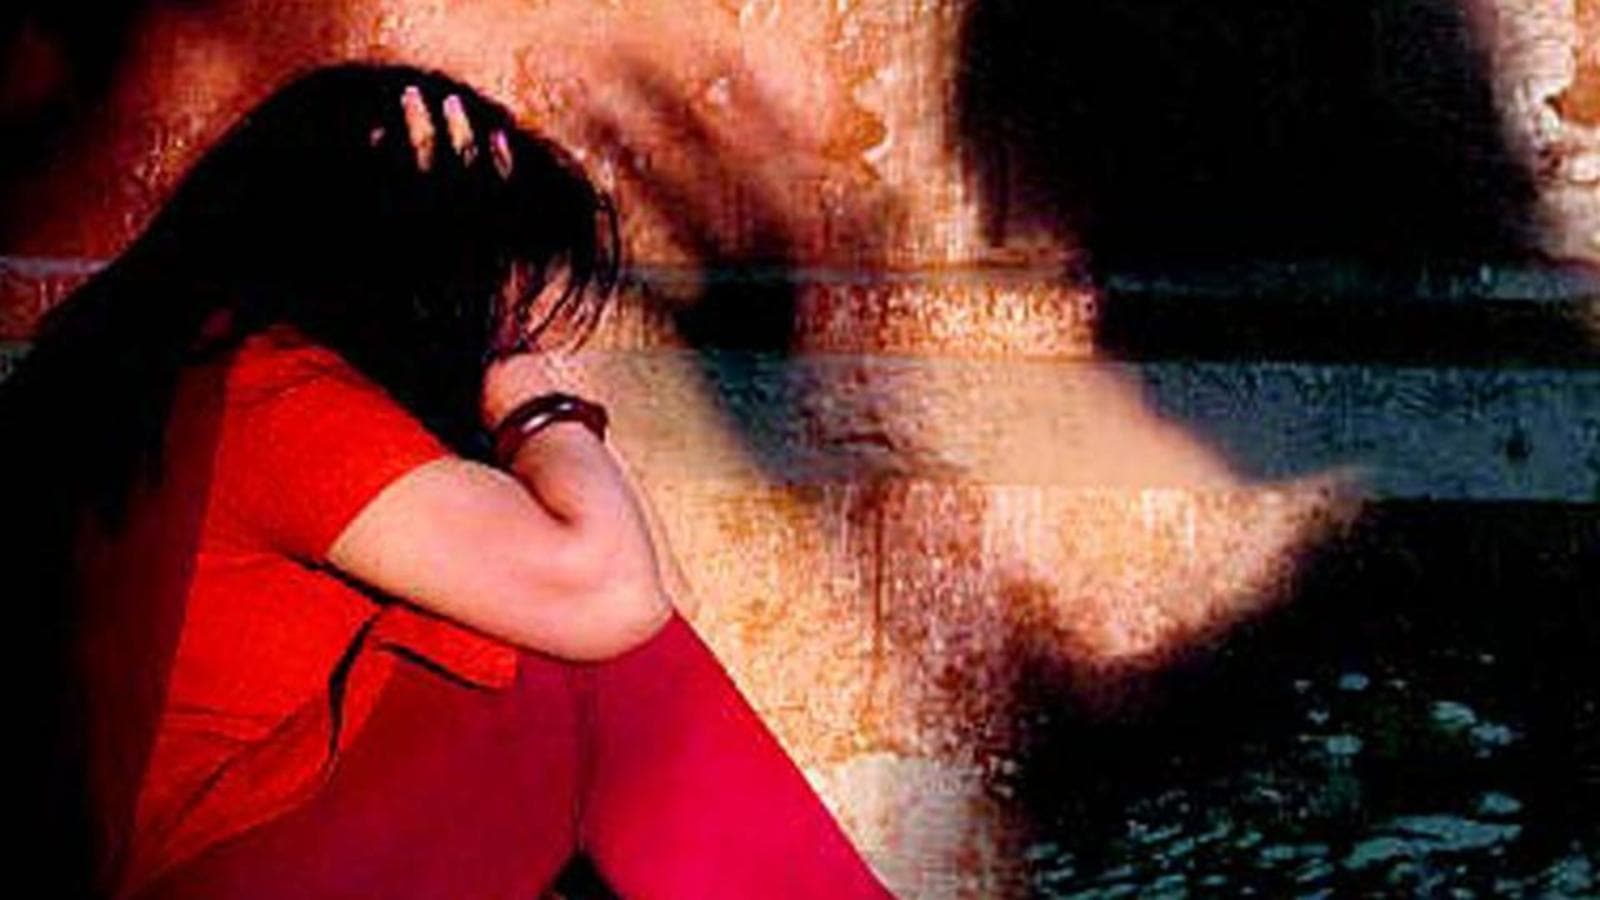 Gang Force Porn - Kerala model gang-raped in Kochi, one arrested: Police | Latest News India  - Hindustan Times